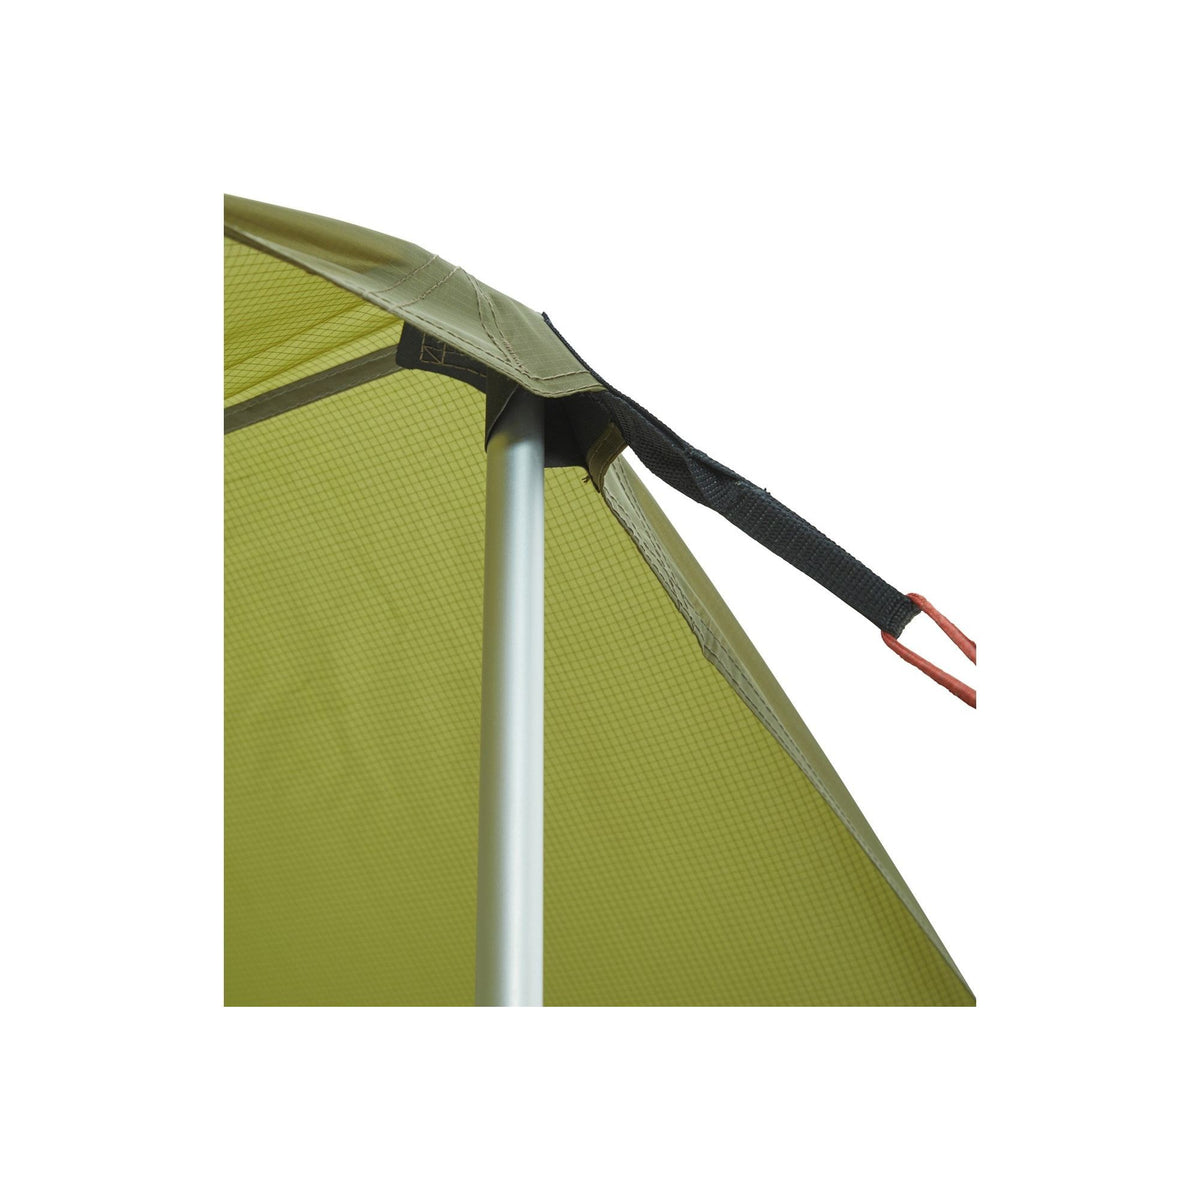 Nordisk Voss 14 PU Tarp - Dark Olive - Hill and Dale Outdoors